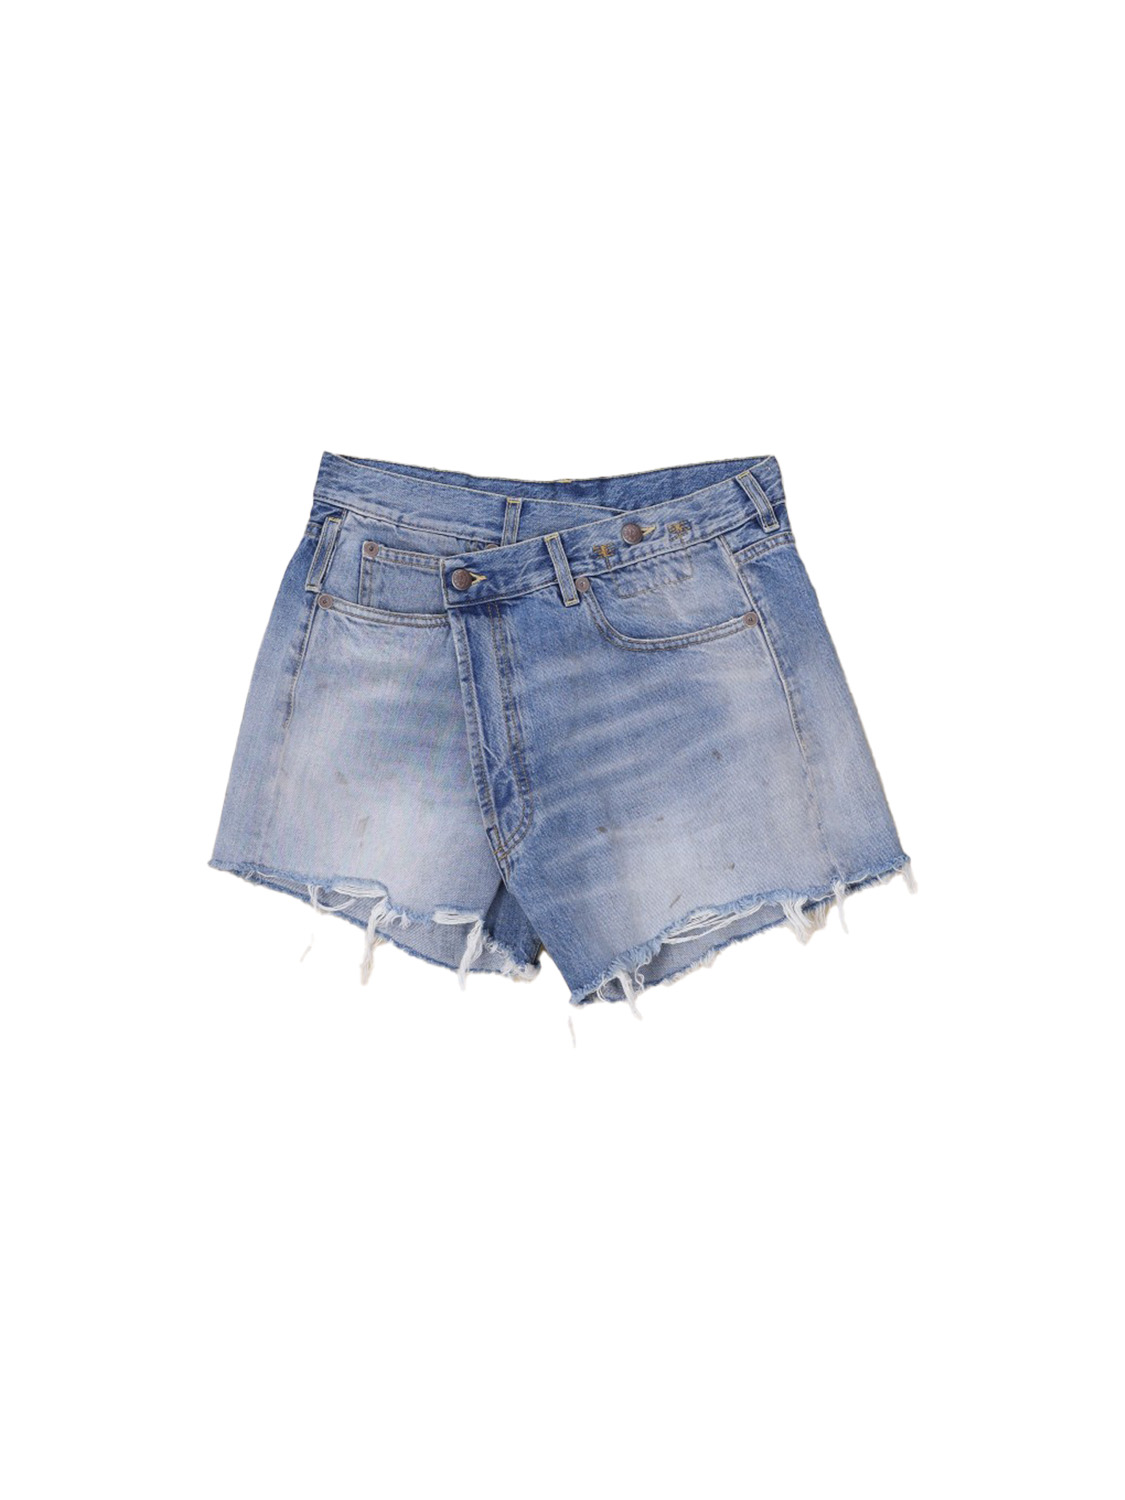 Crossover – denim shorts with a used look 